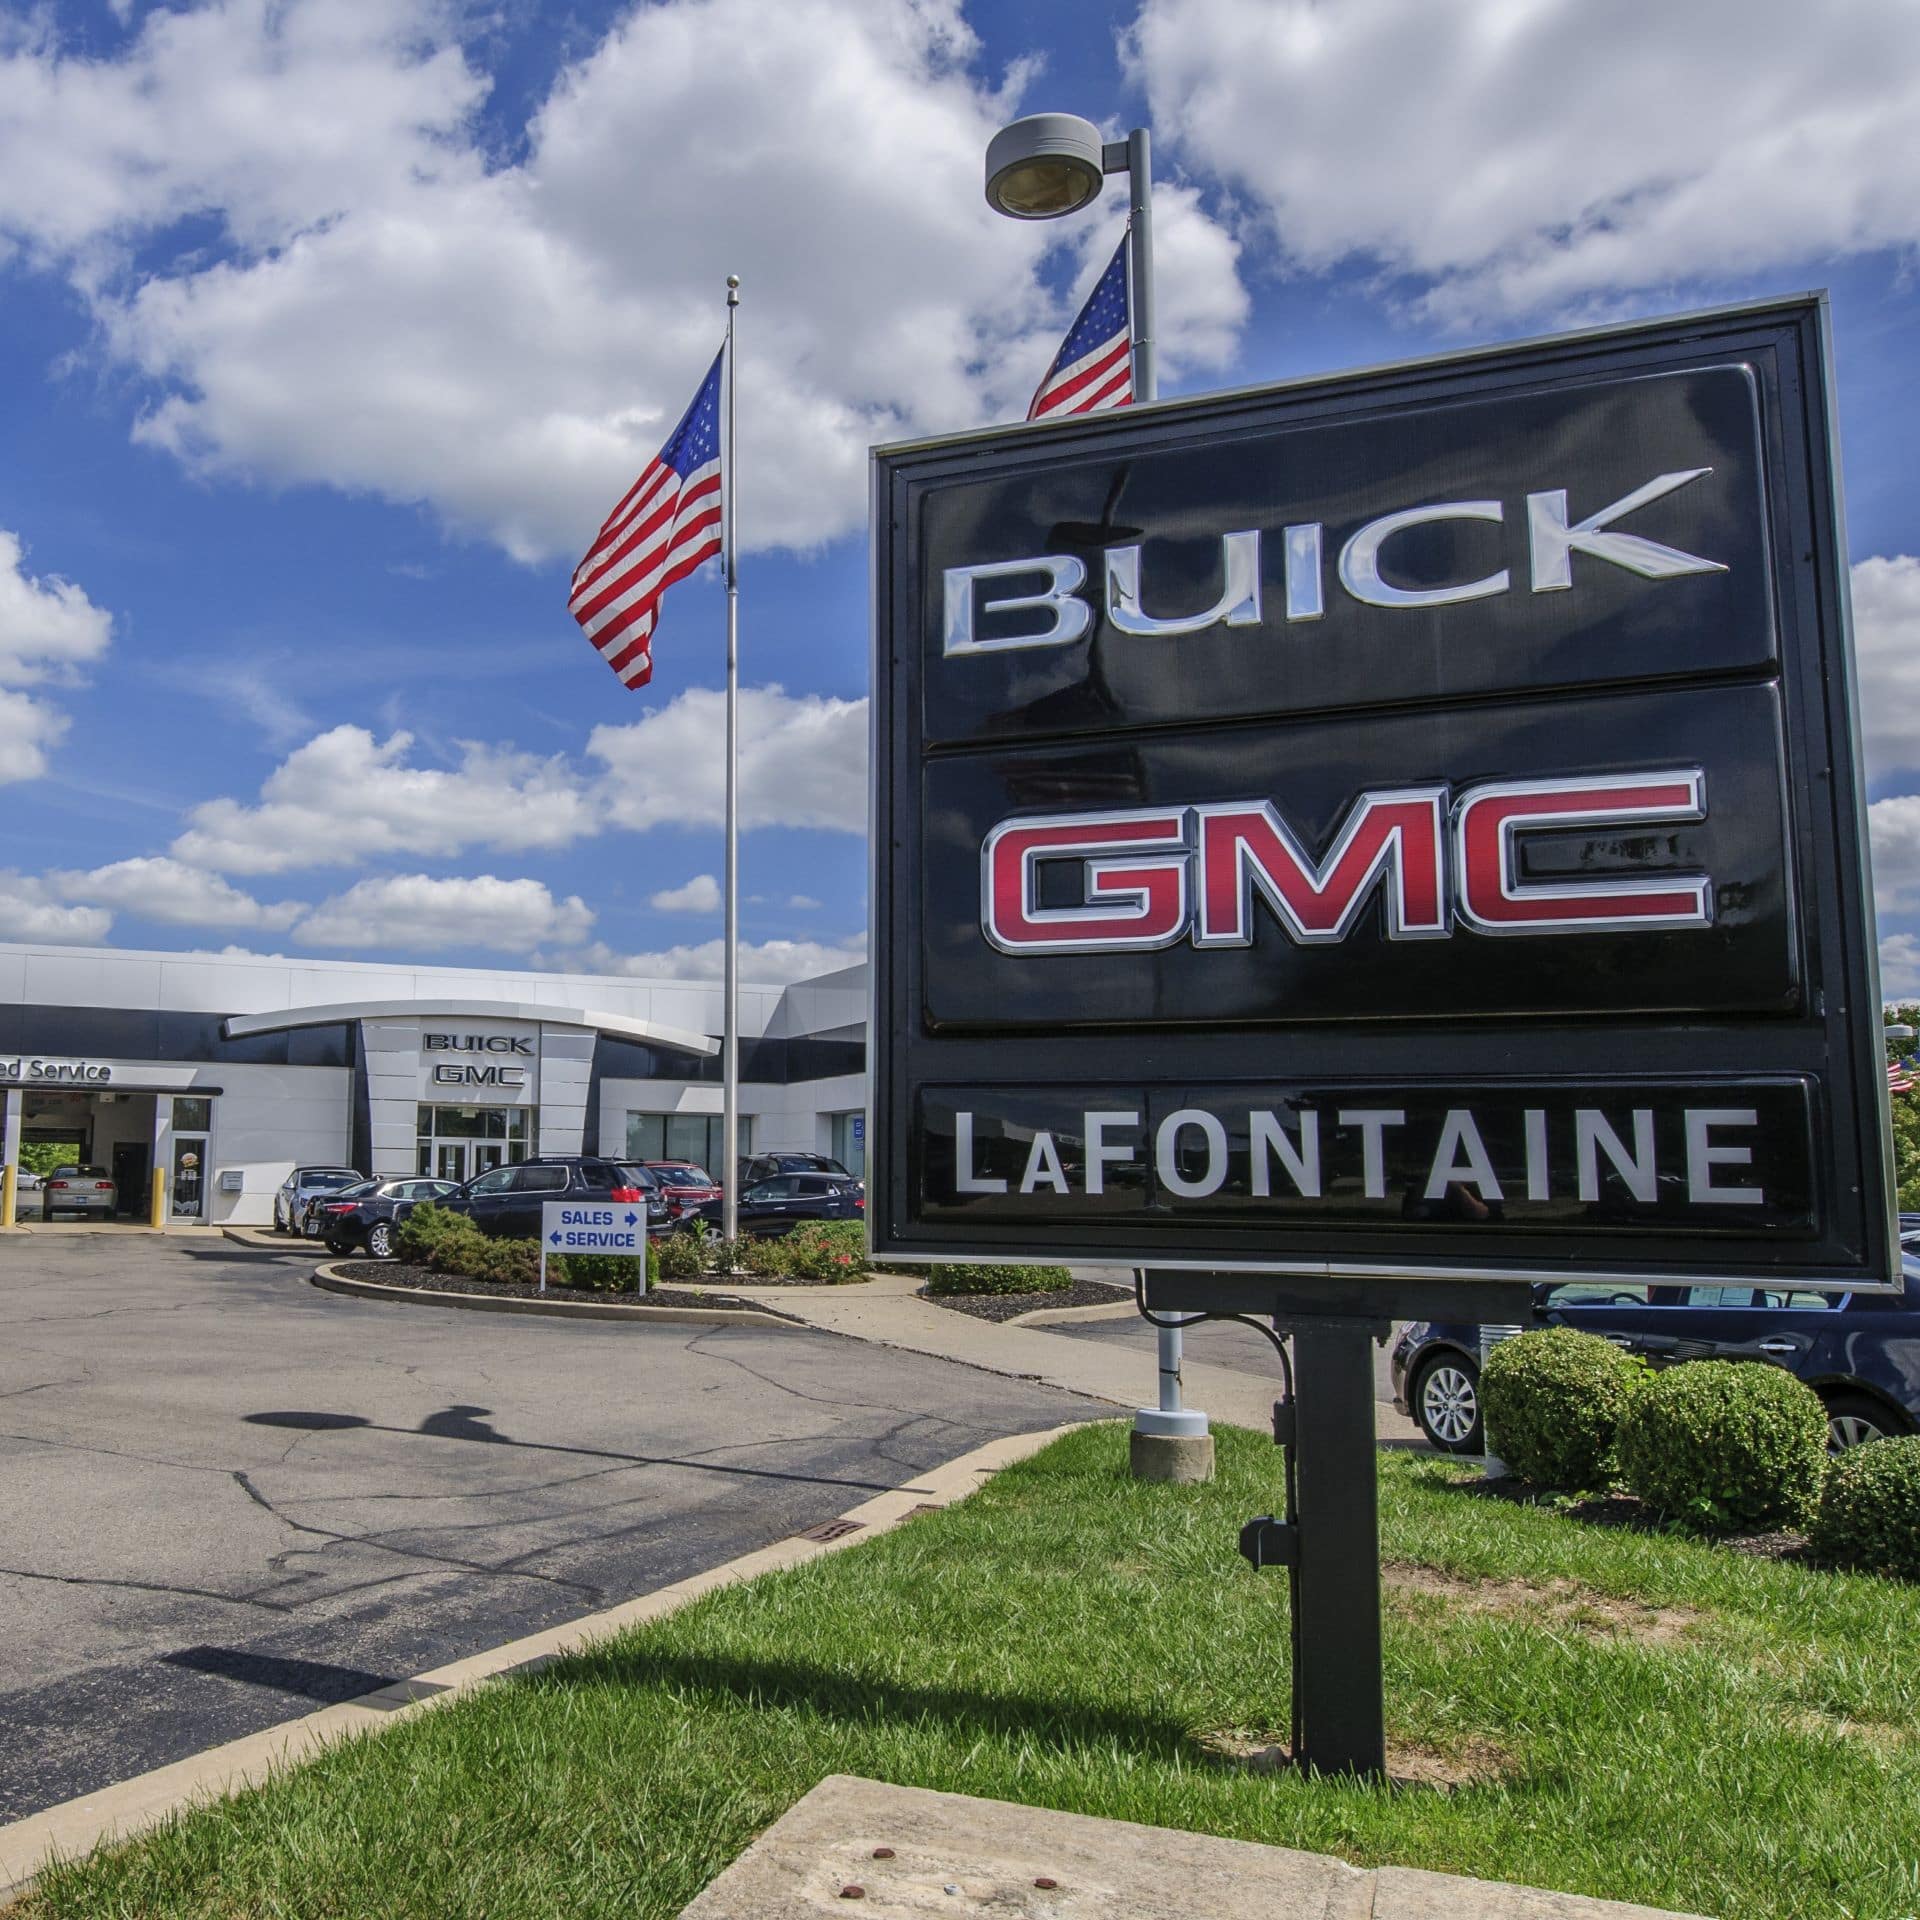 image of LaFontaine Buick GMC Ann Arbor